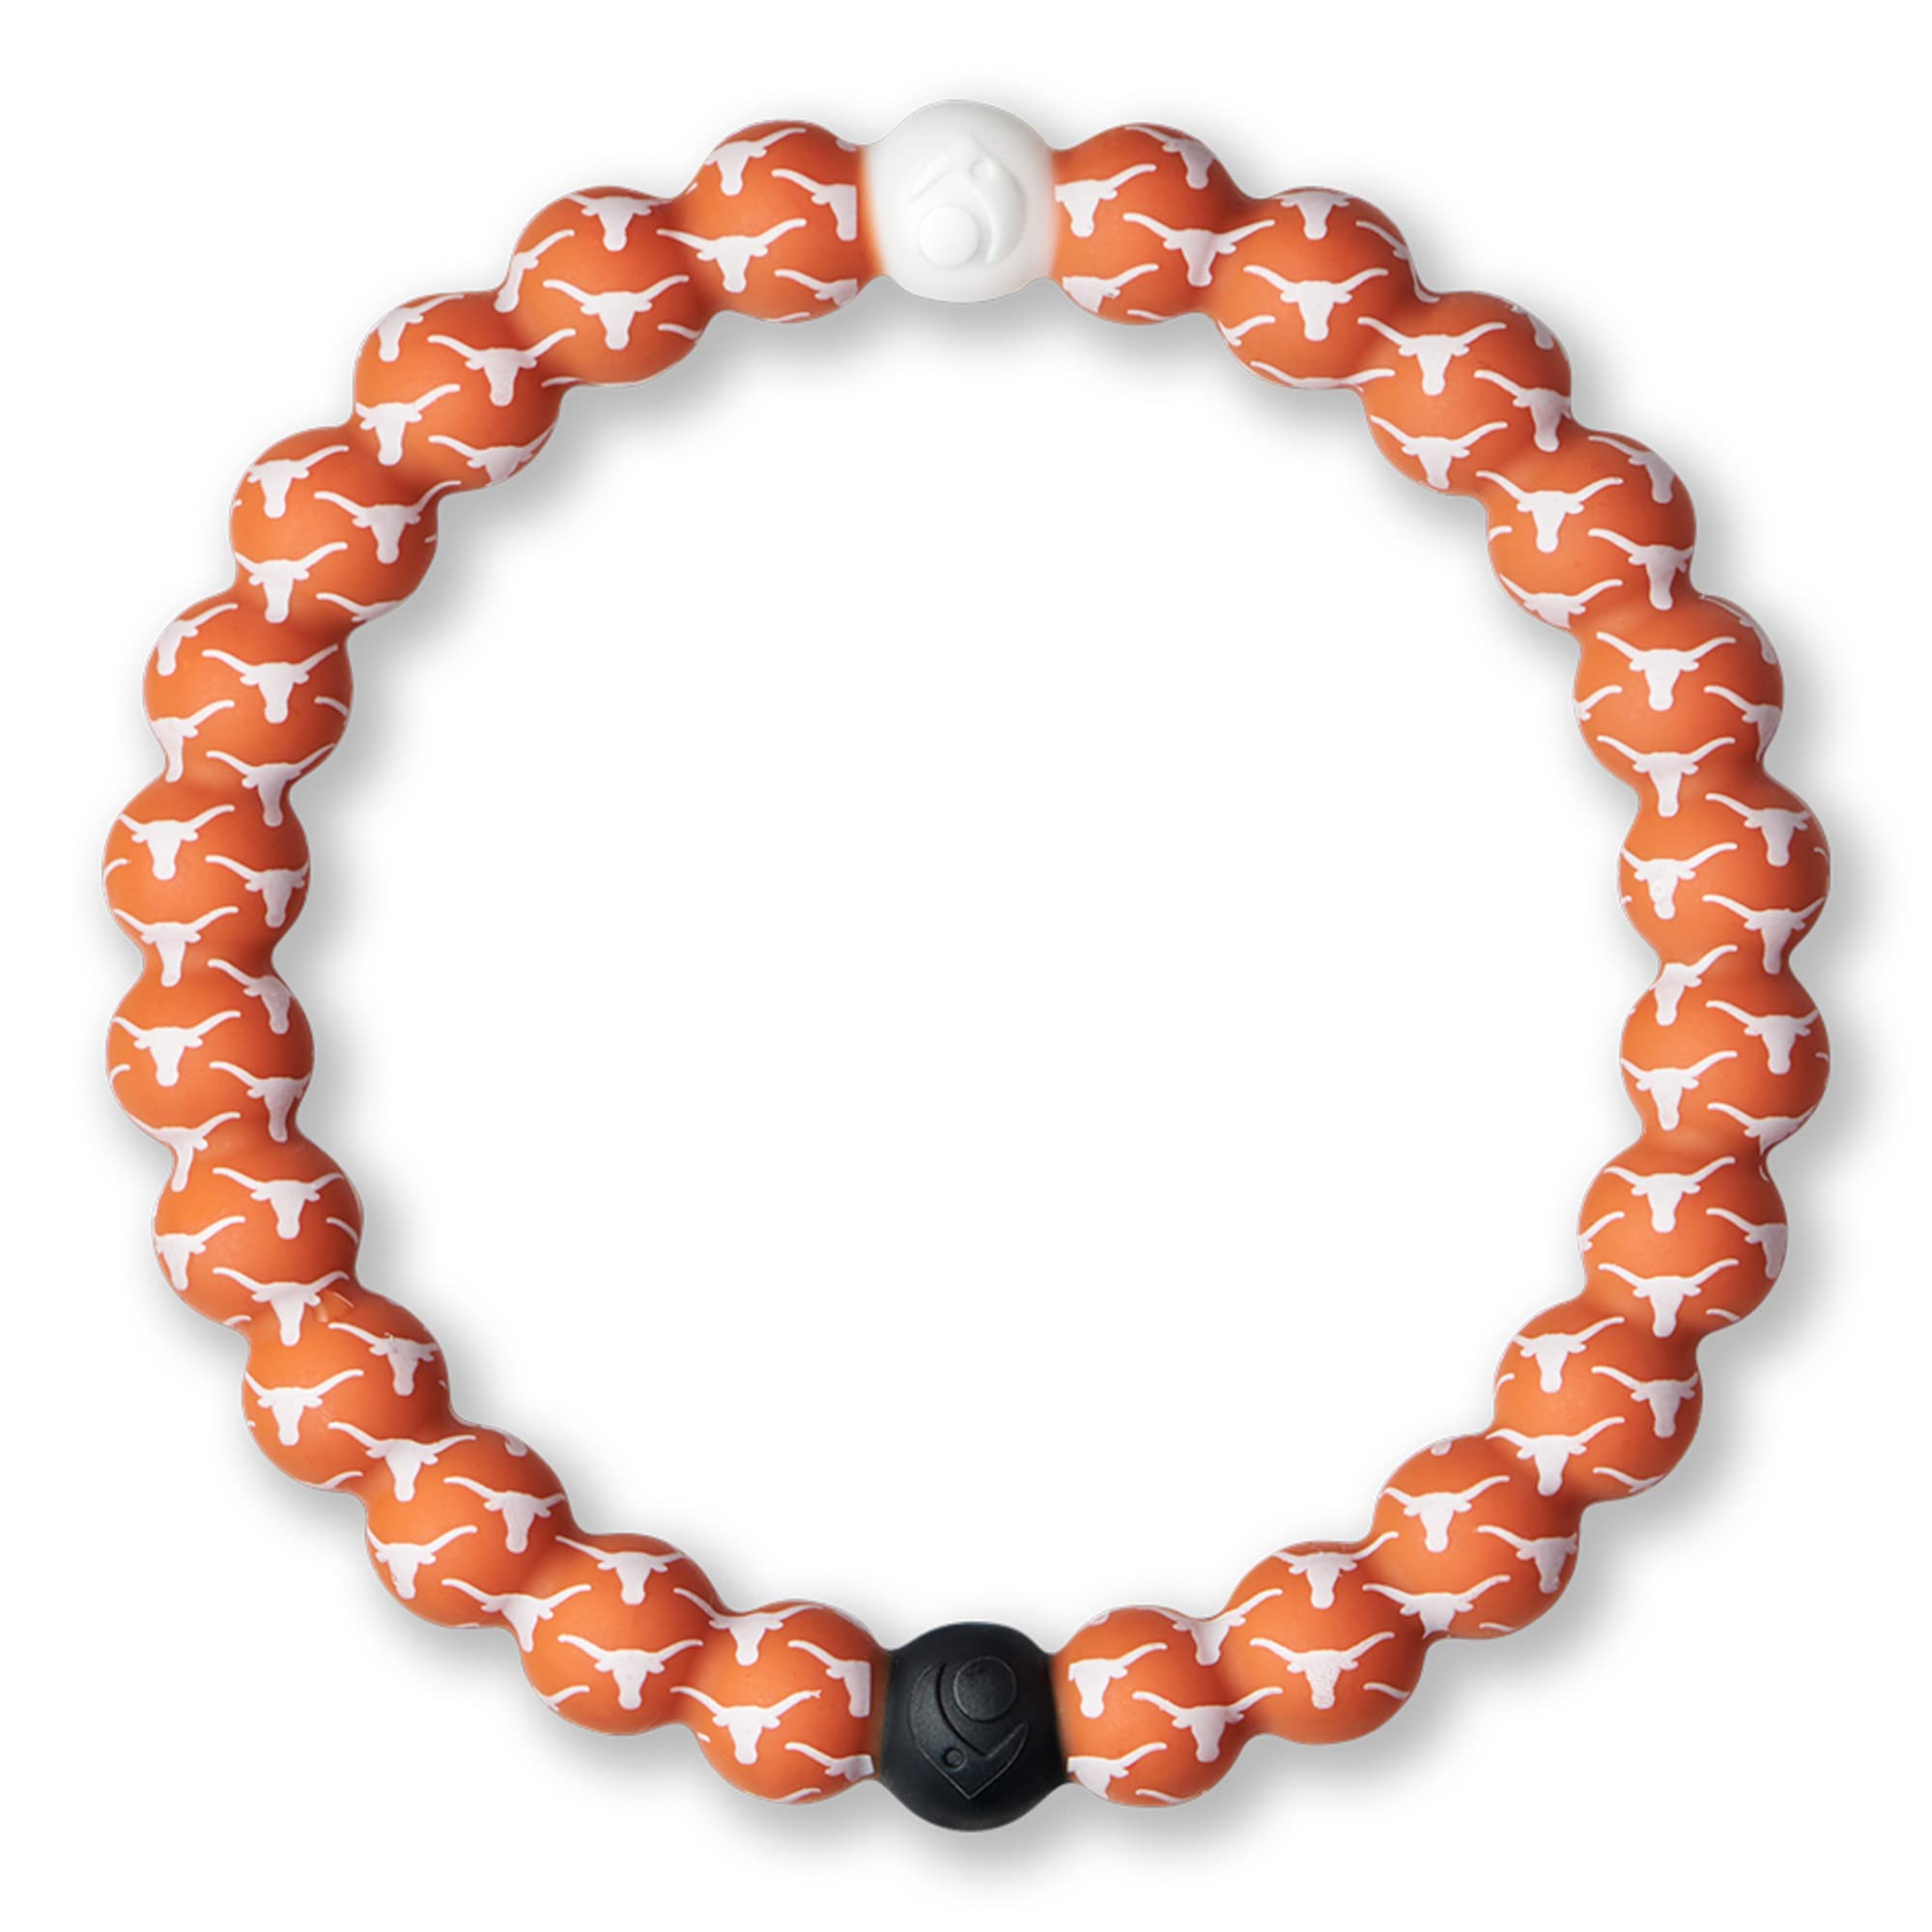 Lokai Collegiate Silicone Beaded Bracelet for Women & Men - Extra Large, 7.5 Inch Circumference - Silicone Jewelry Fashion Bracelet Slides-On for Comfortable Fit